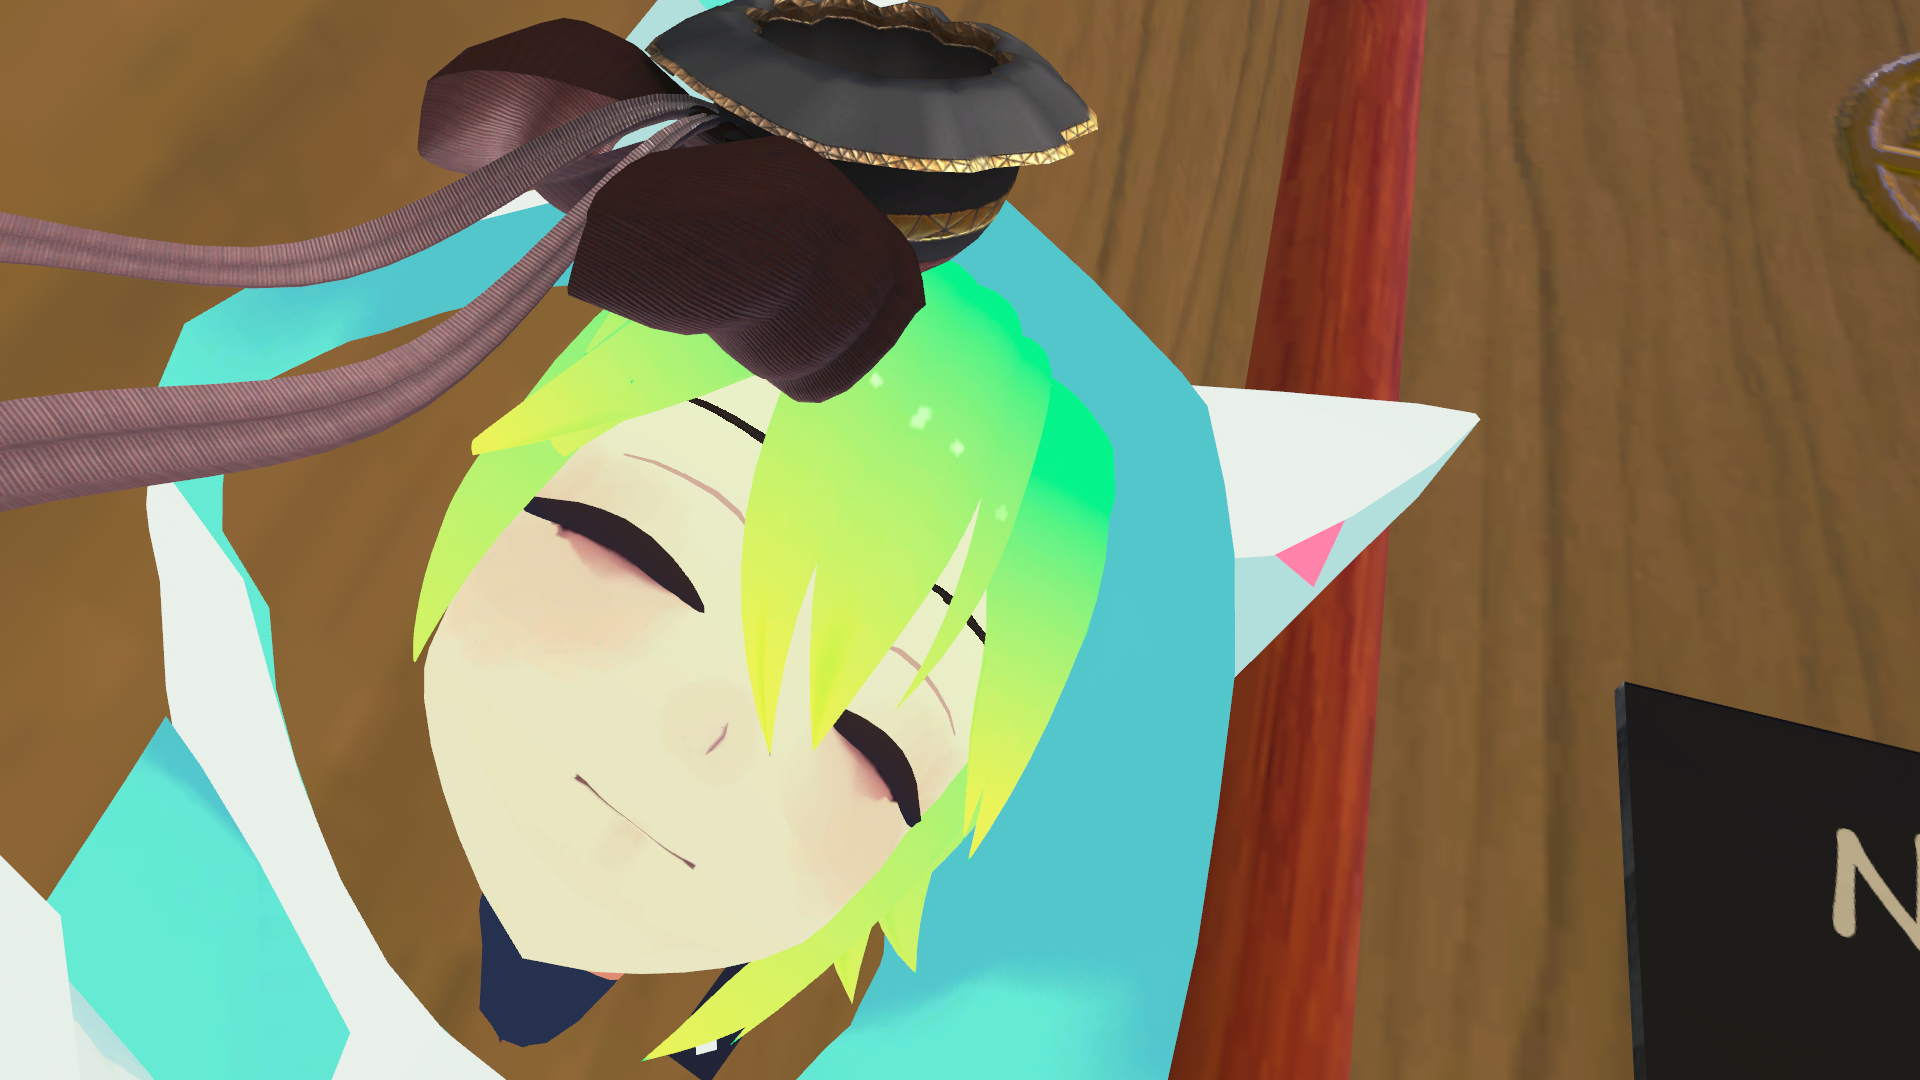 VRChat_1920x1080_2021-12-05_02-24-19.999.png